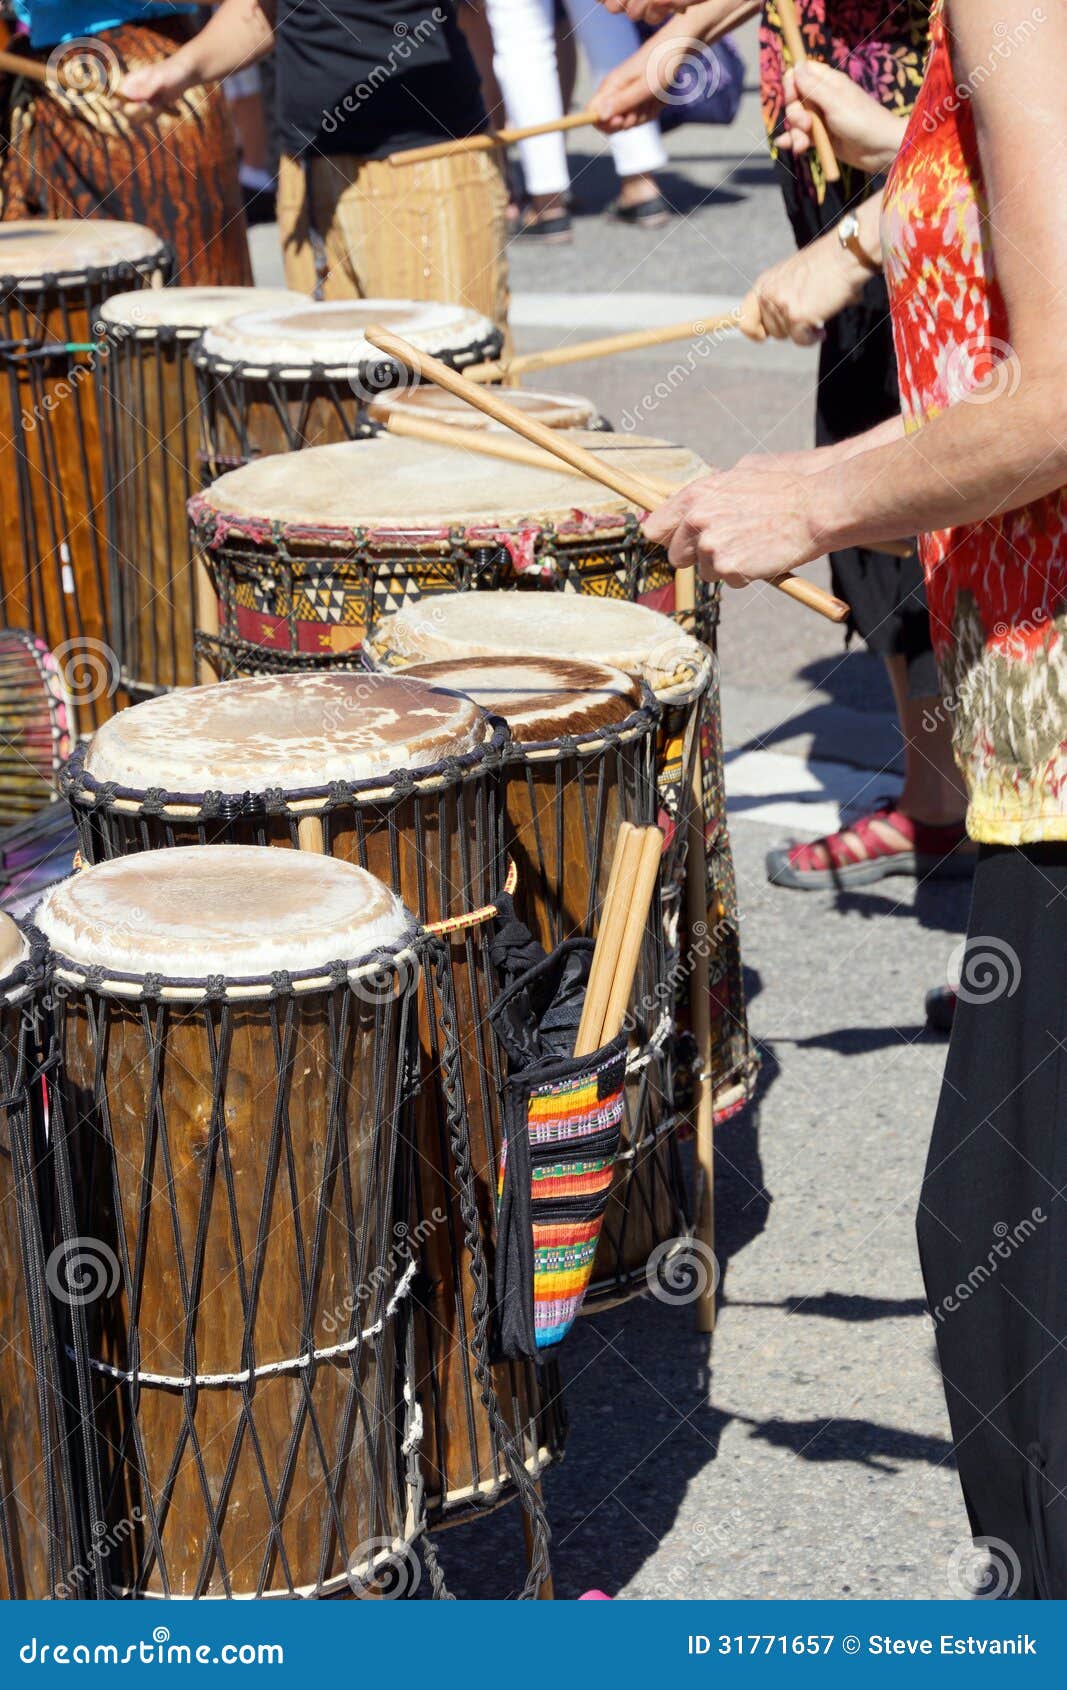 drummers playing at a saturday market penticton, british columbia, canada.